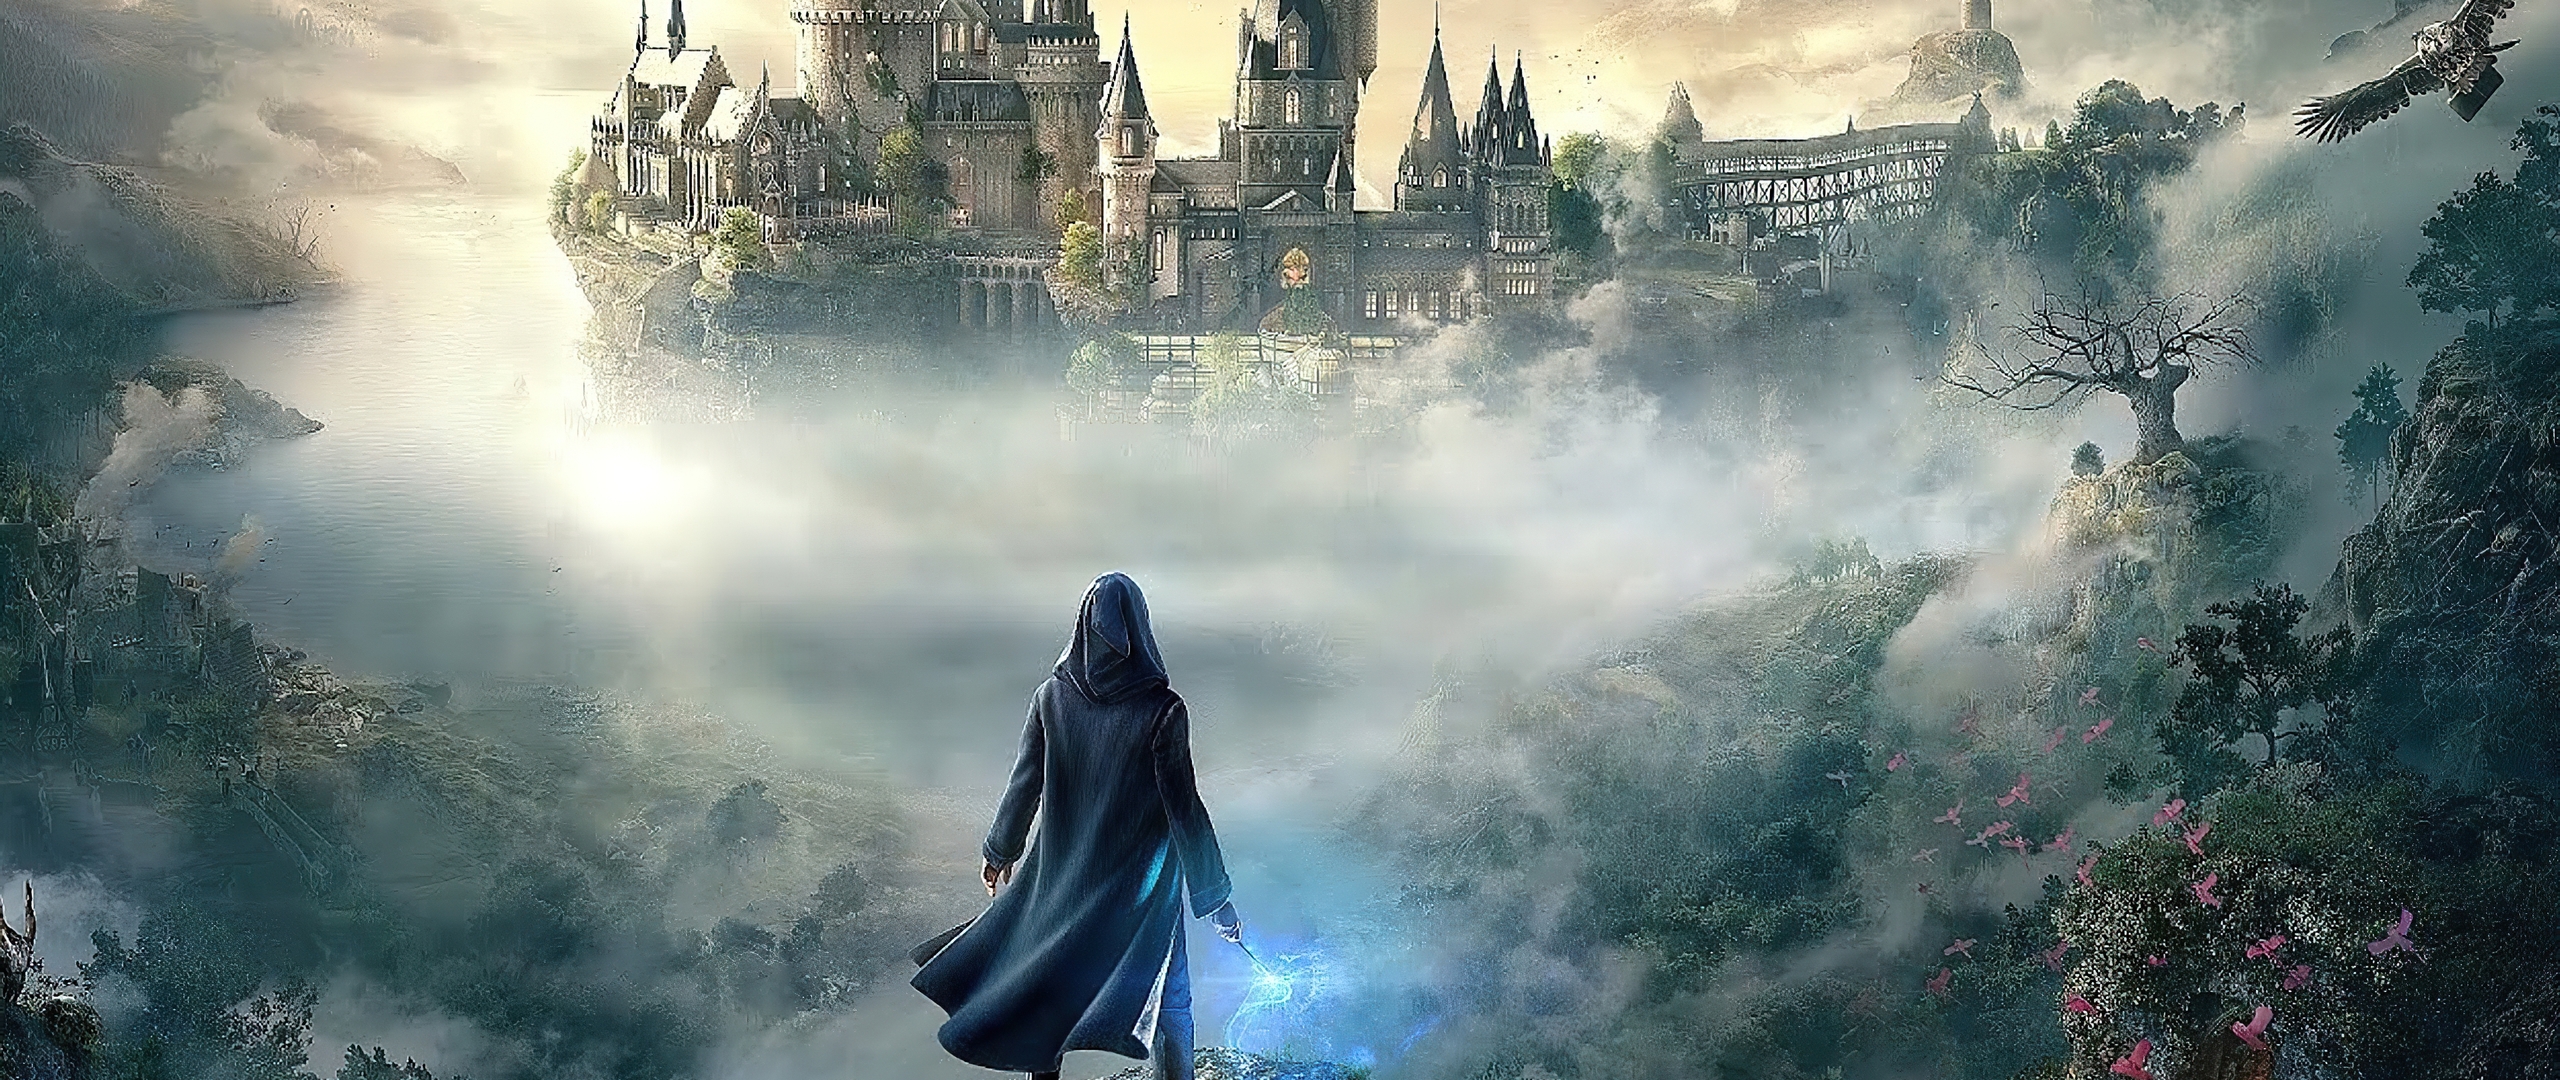 Hogwarts Legacy Wallpaper 4K, Deluxe Edition, PC Games, #10493